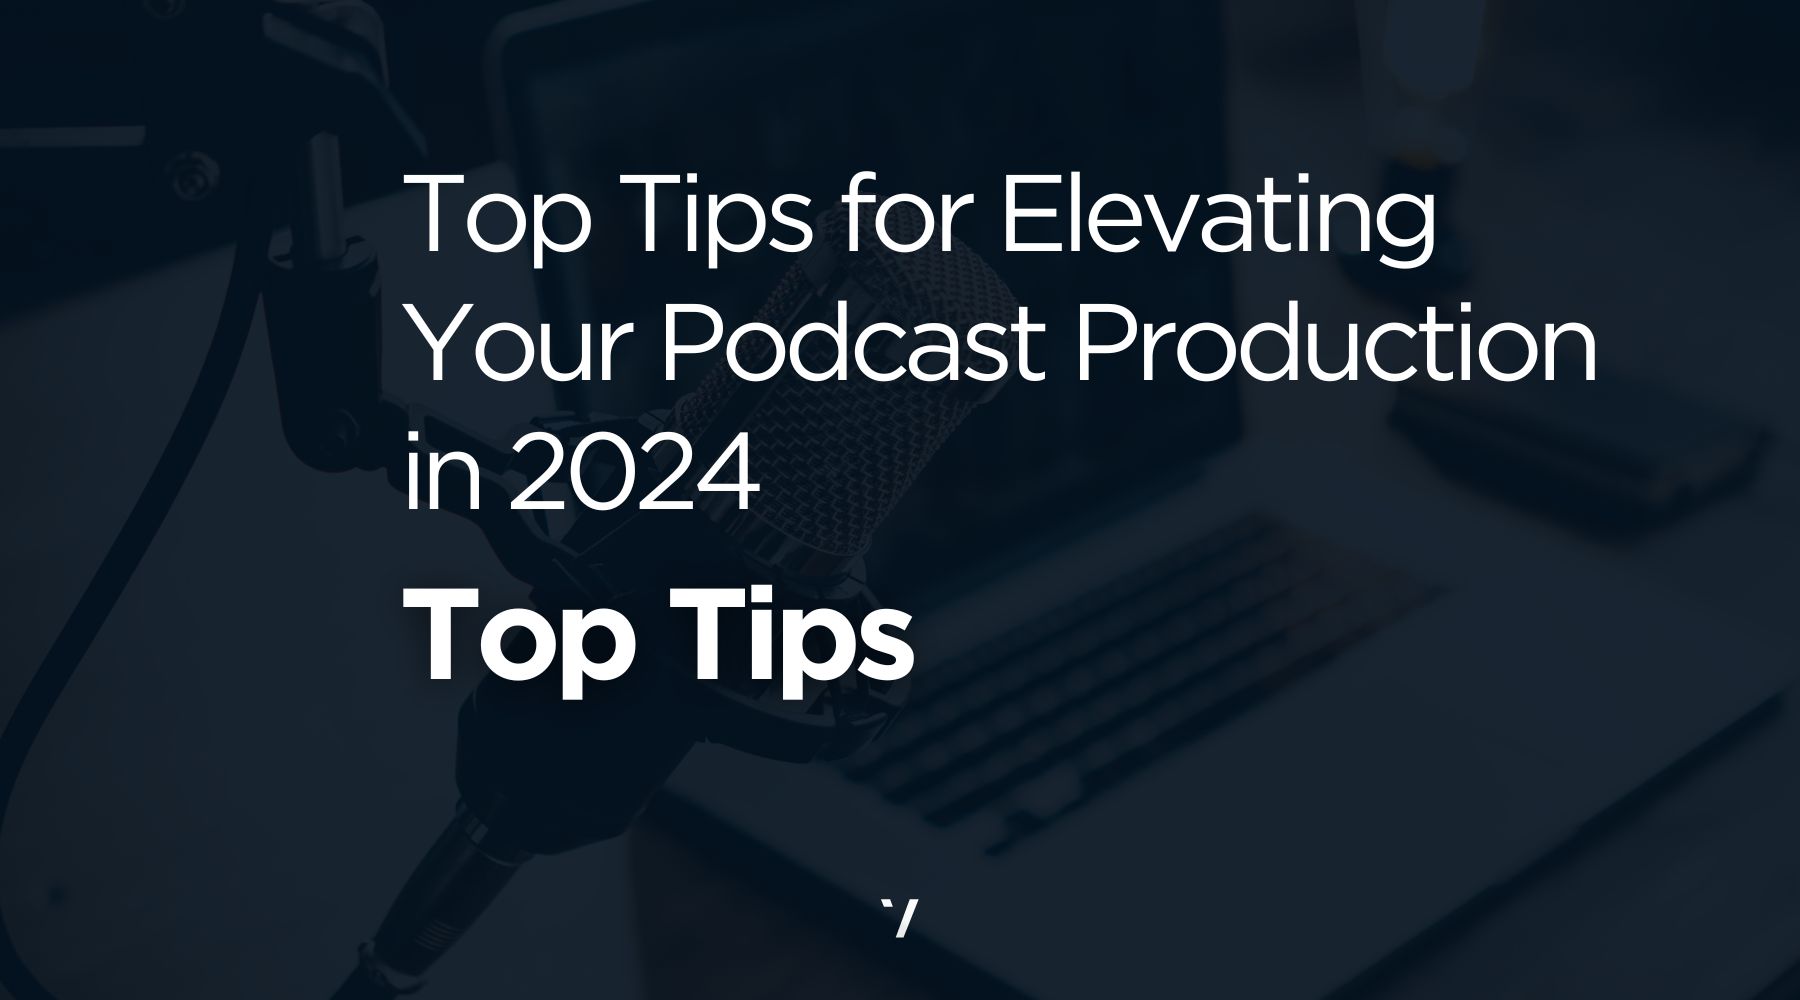 Top Tips for Elevating Your Podcast Production in 2024